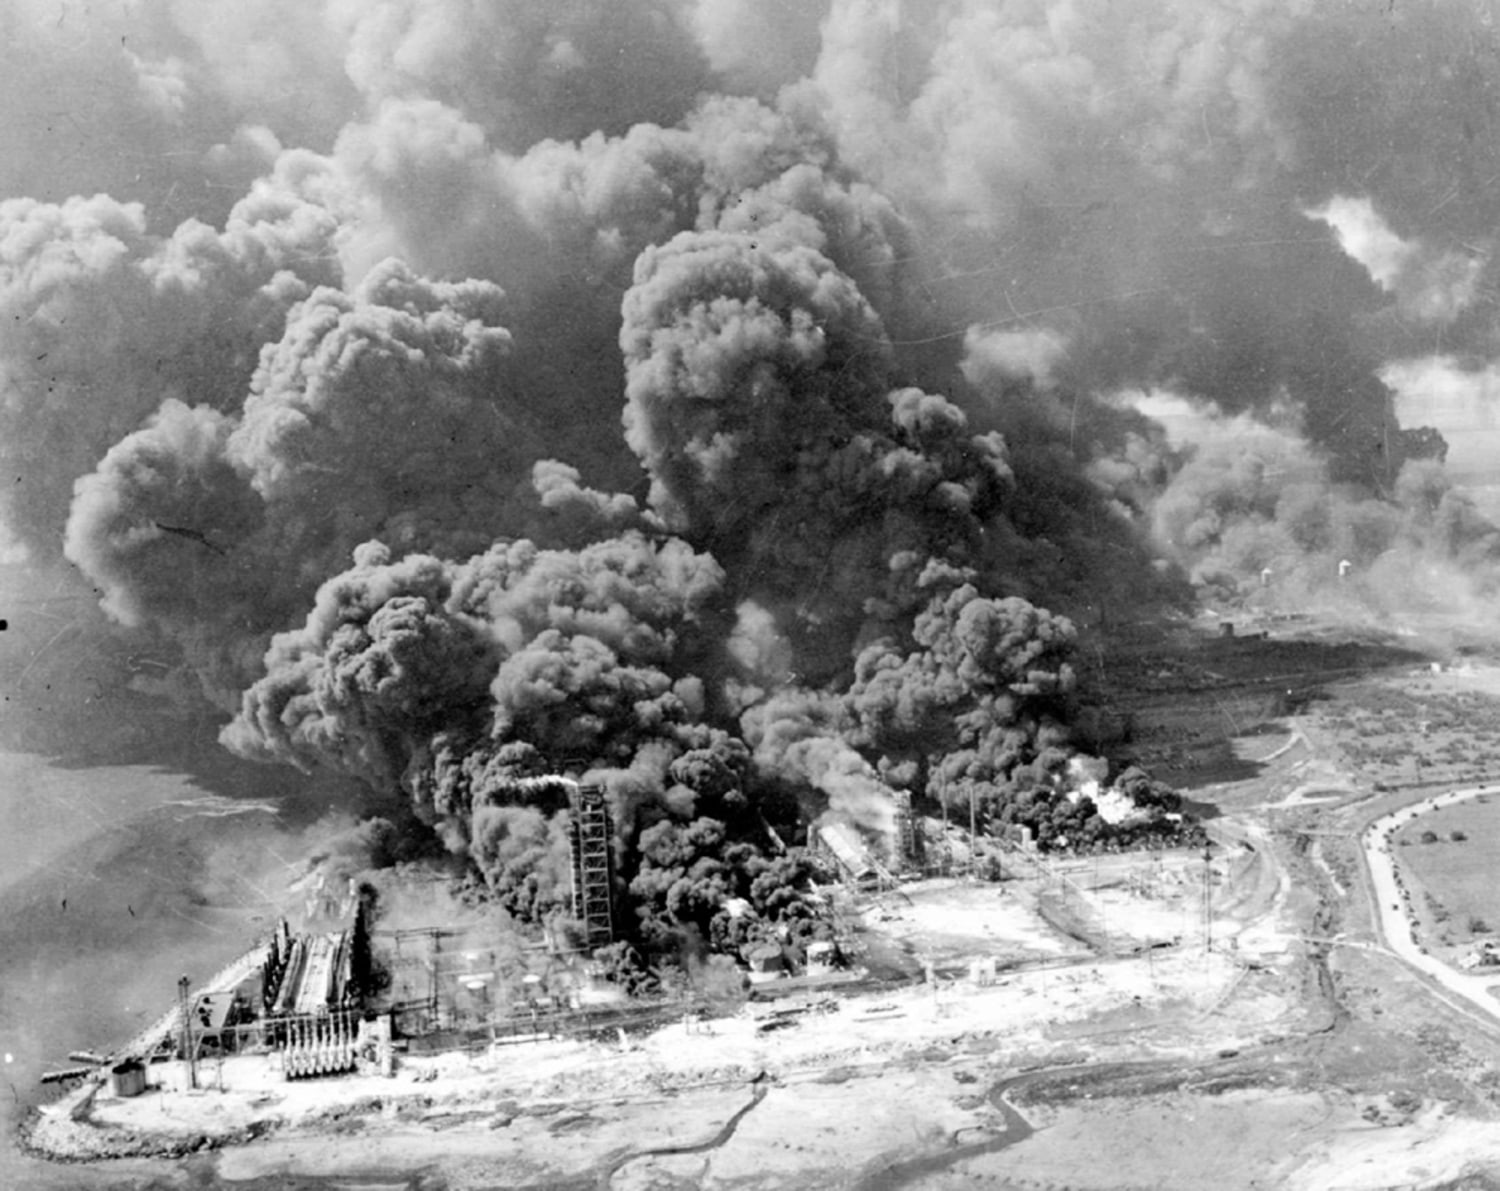 How a Fertilizer Accident Led to the Deadliest Industrial Disaster